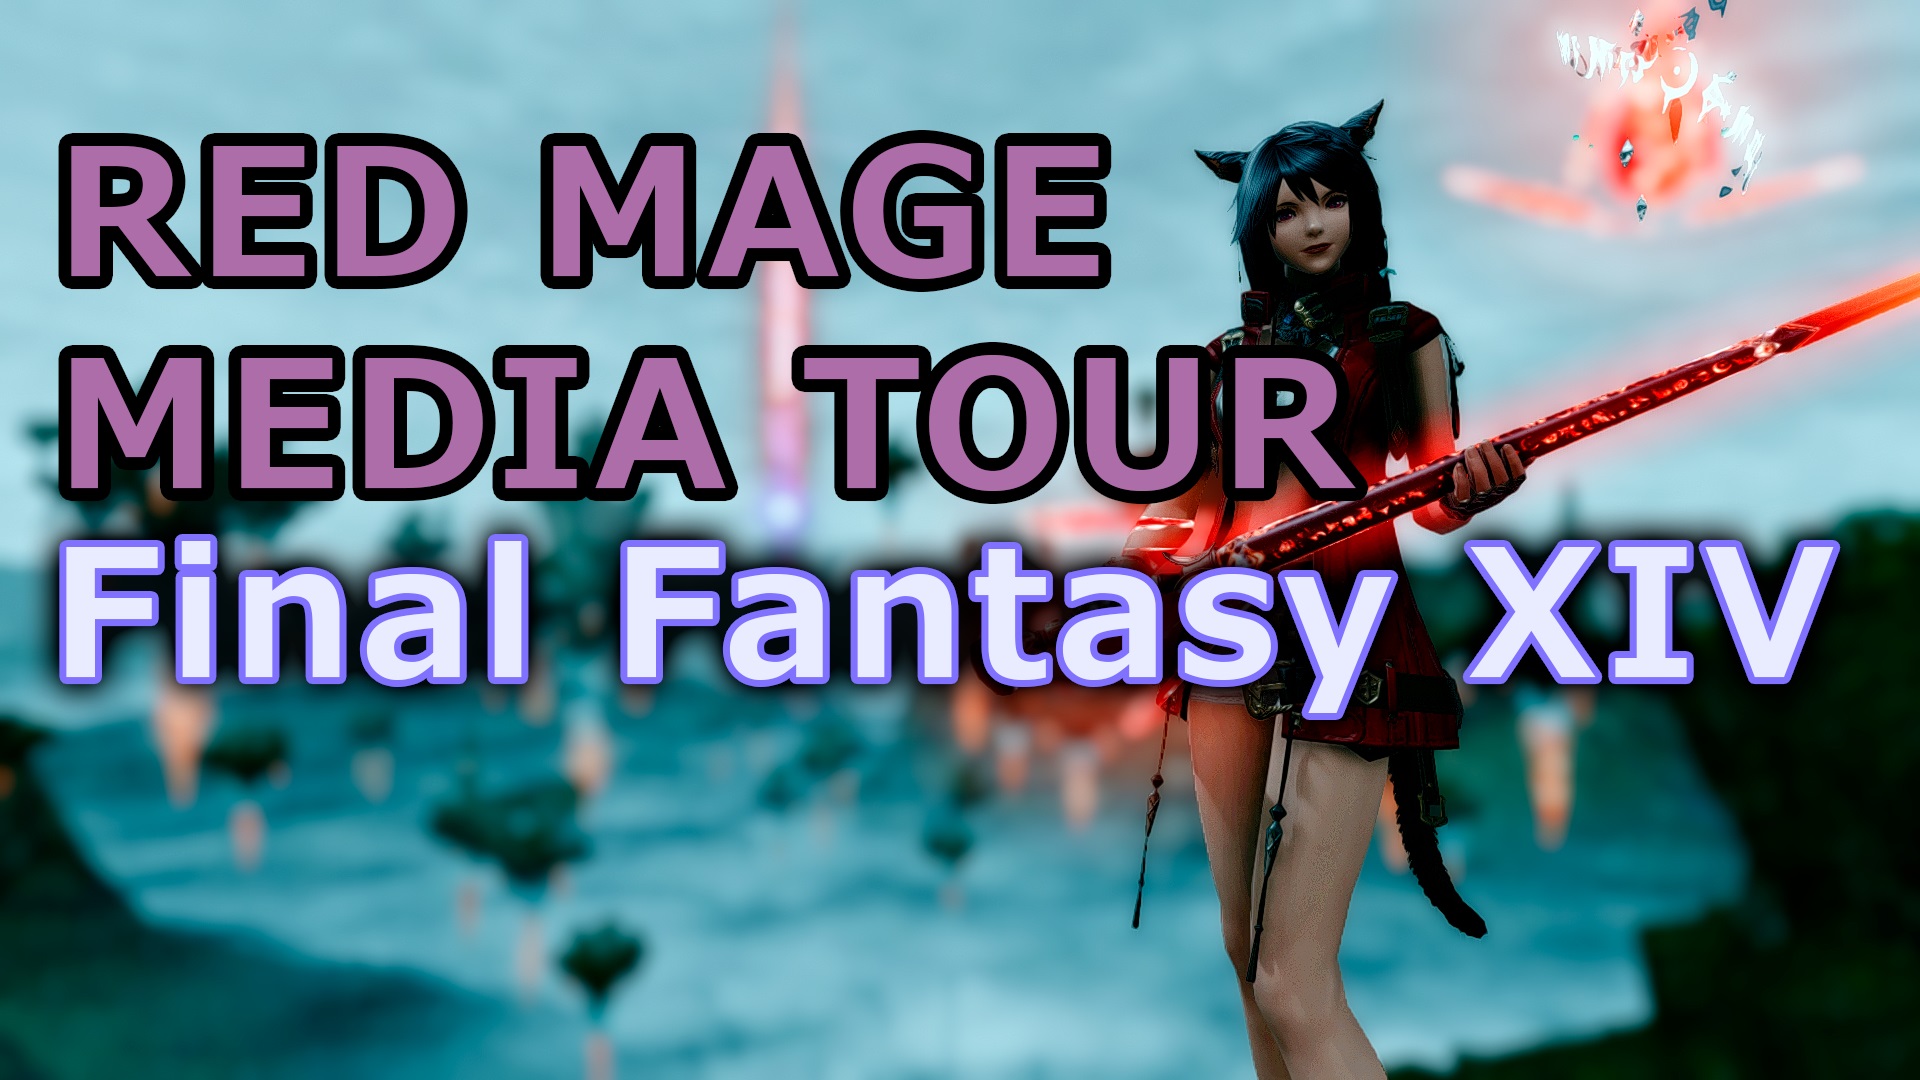 Red Mage Media Tour